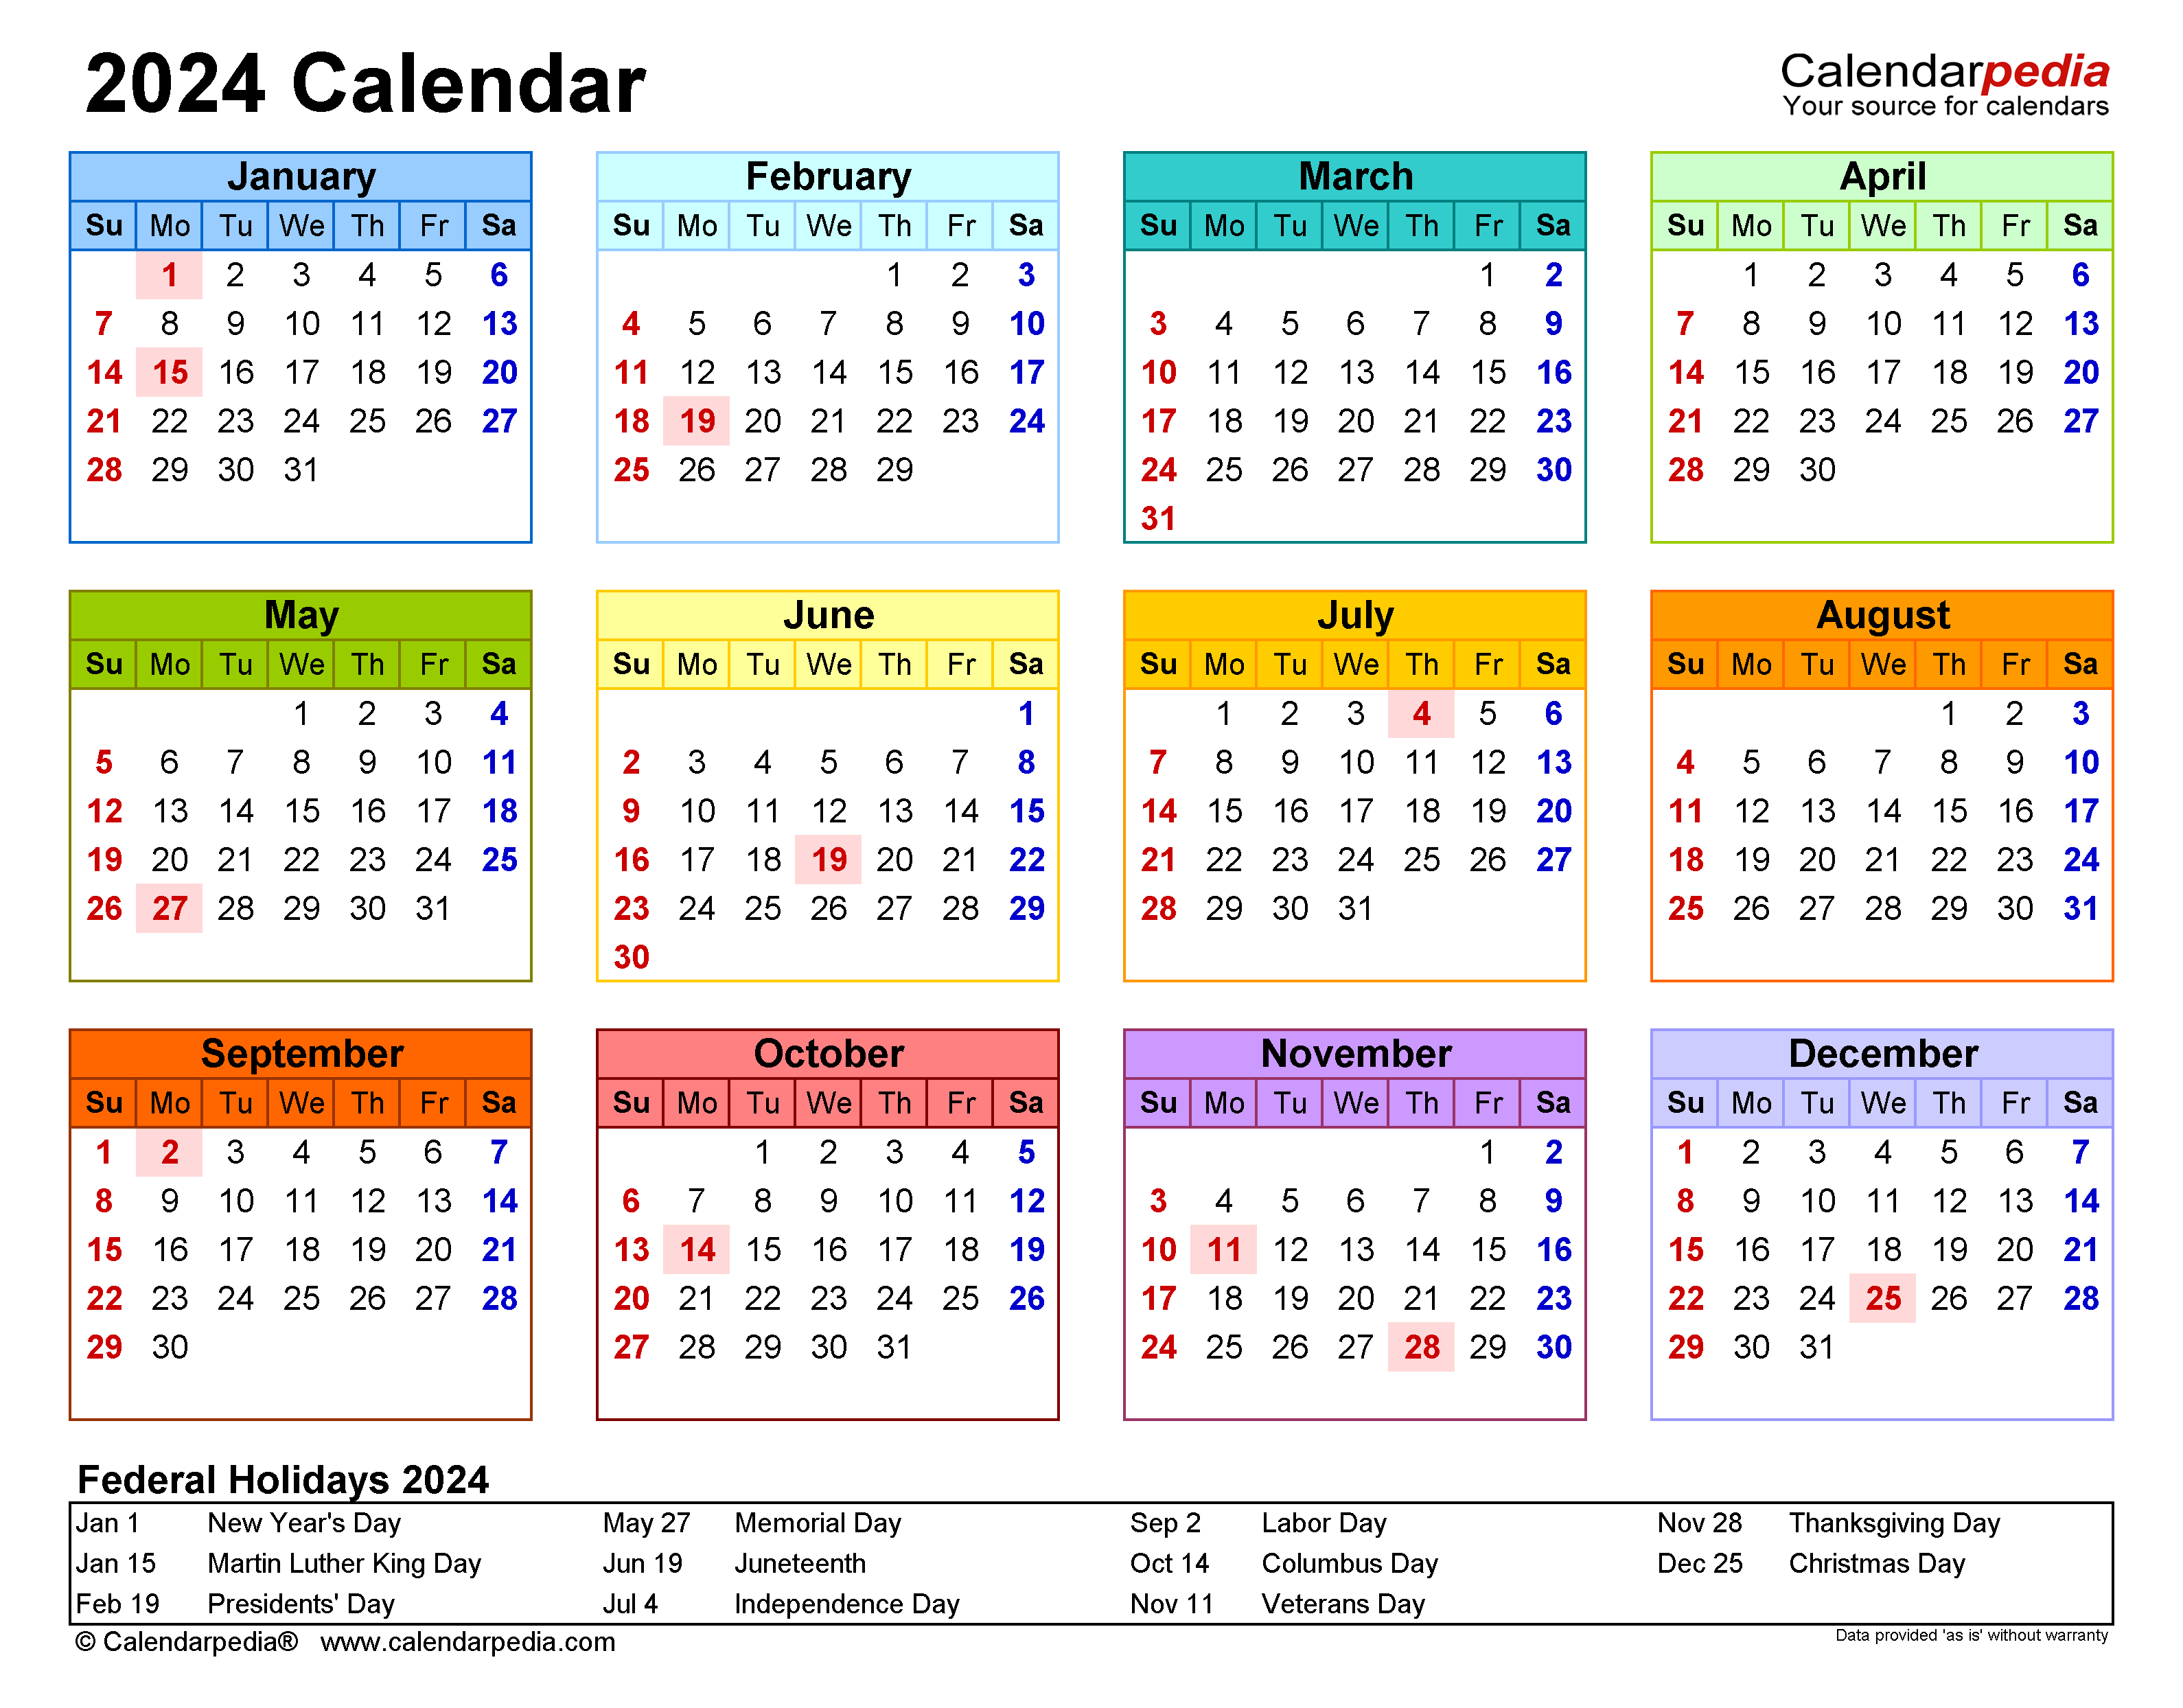 Printable Calendar 2024 - Free Printable 2024 Calendar With Holidays Month By Month